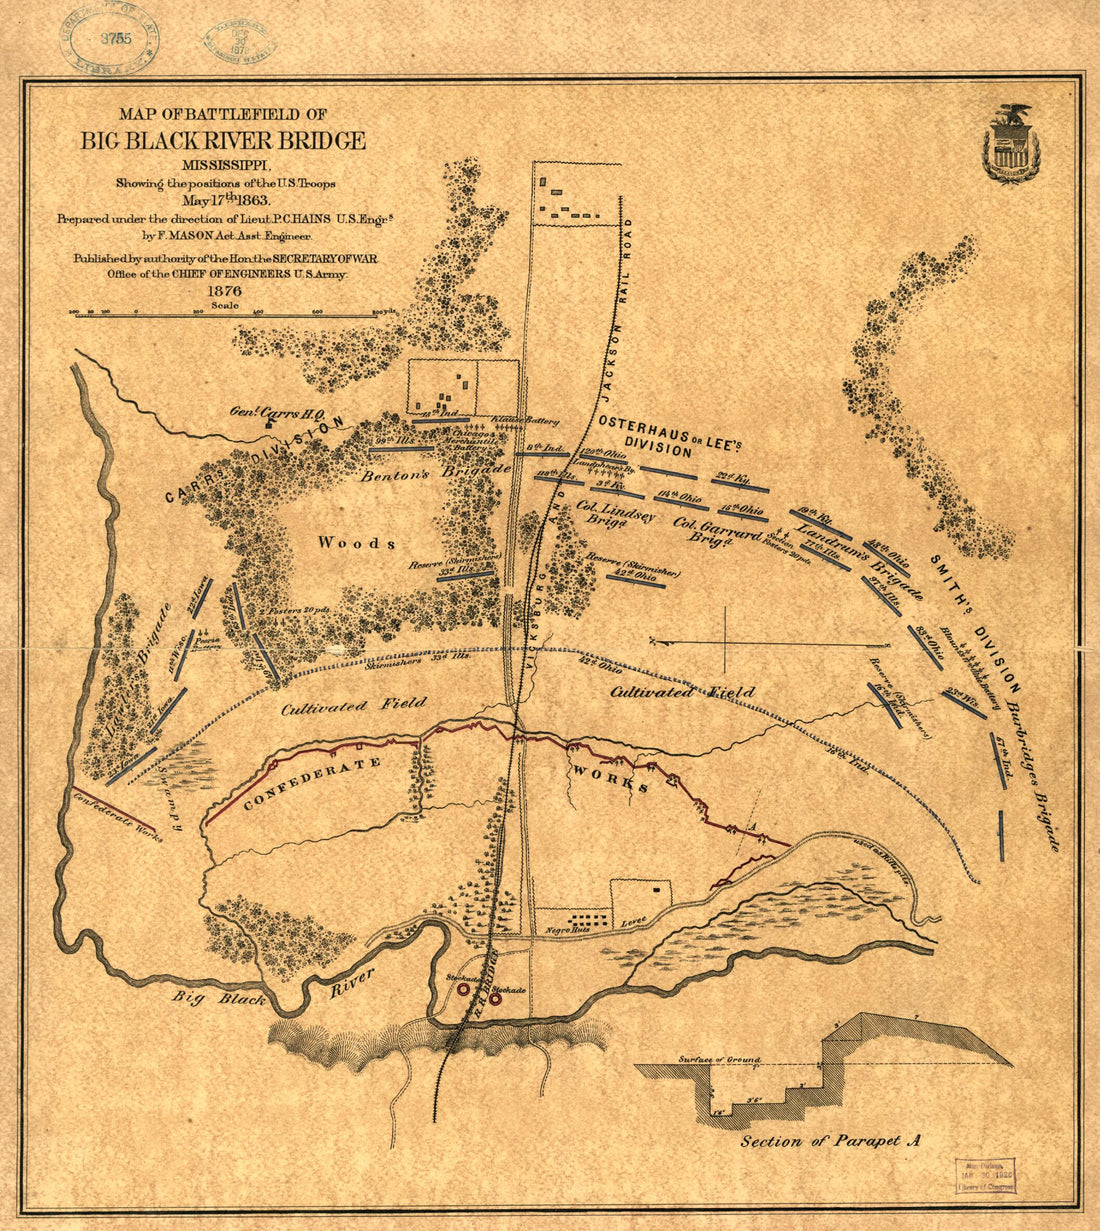 This old map of Map of Battlefield of Big Black River Bridge, Mississippi, Showing the Positions of the U.S. Troops, May 17th 1863 from 1876 was created by F. Mason,  United States Army. Office of the Chief of Engineers in 1876